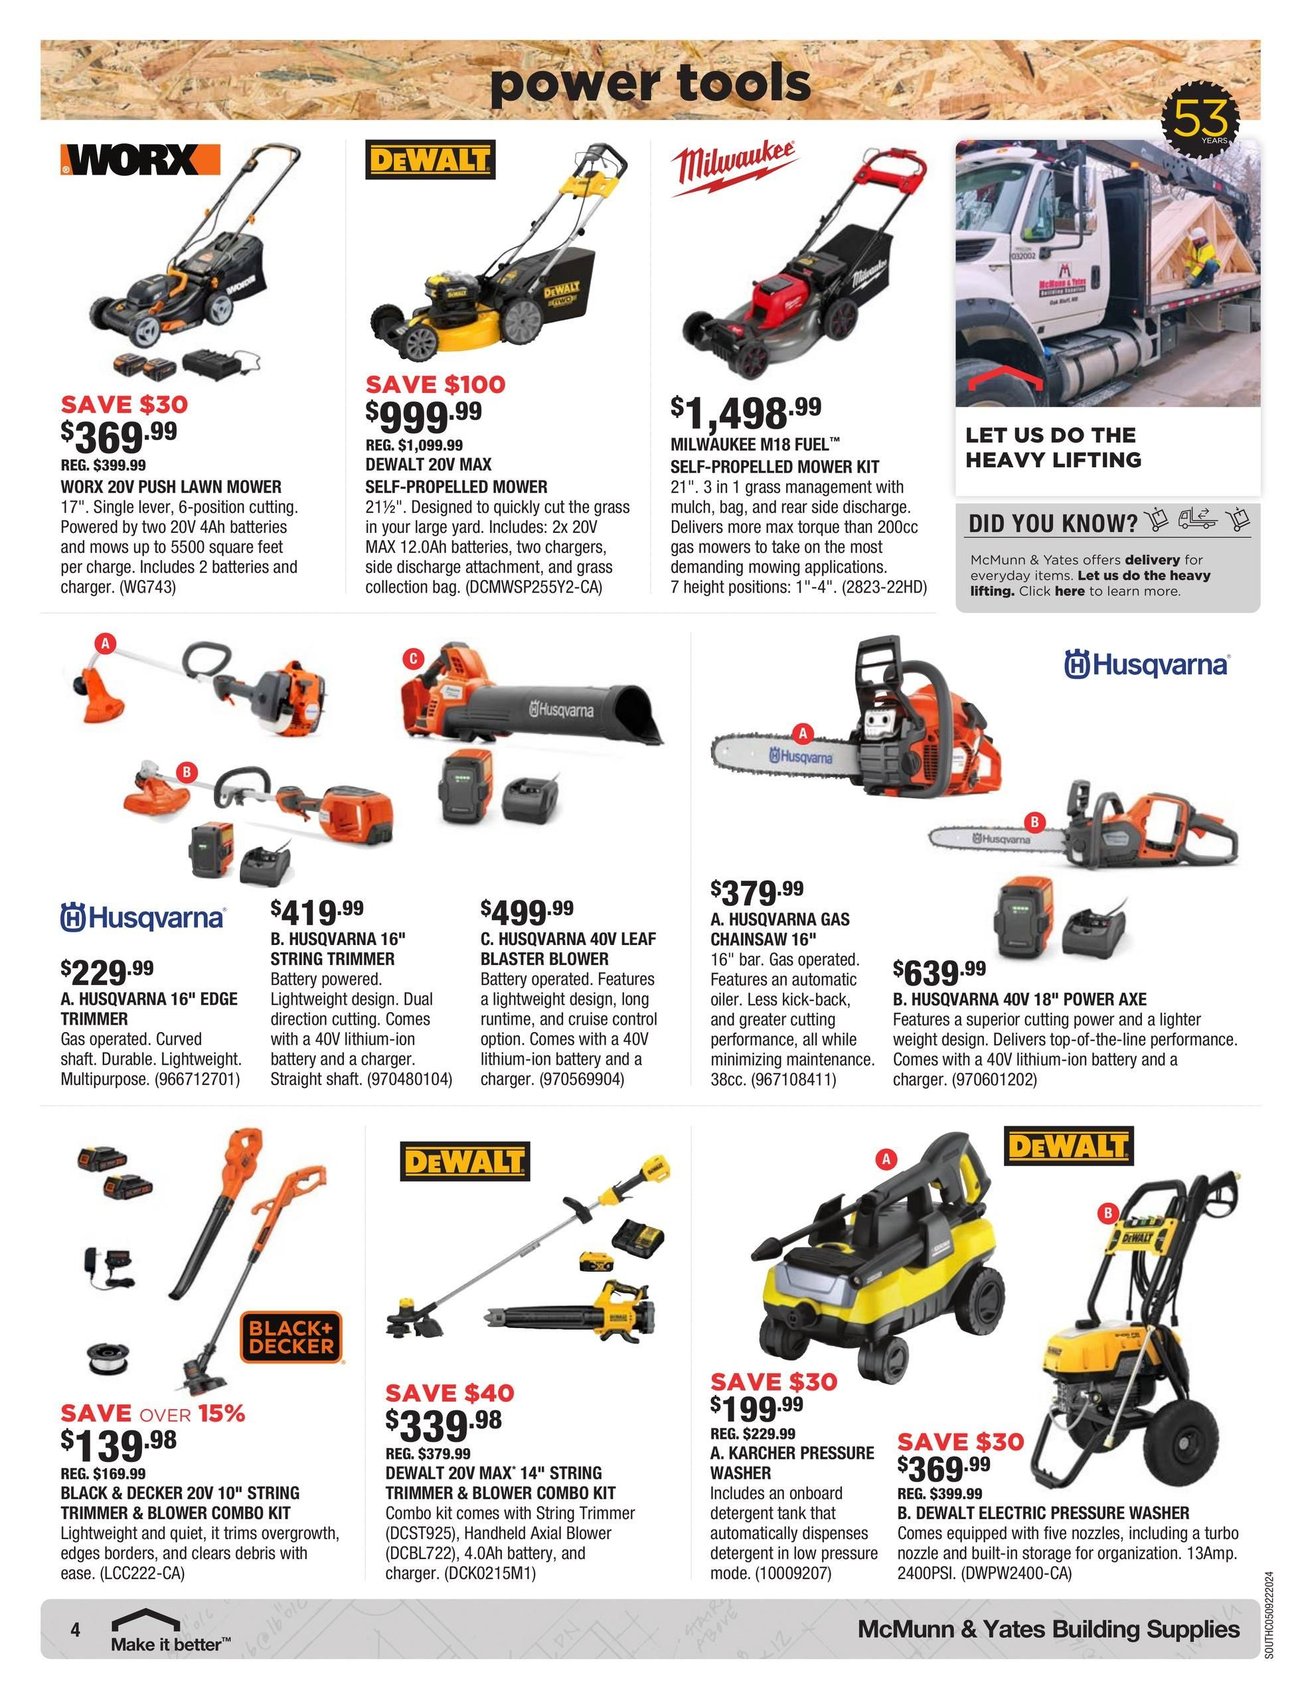 McMunn & Yates Building Supplies - Flyer Specials - Page 4